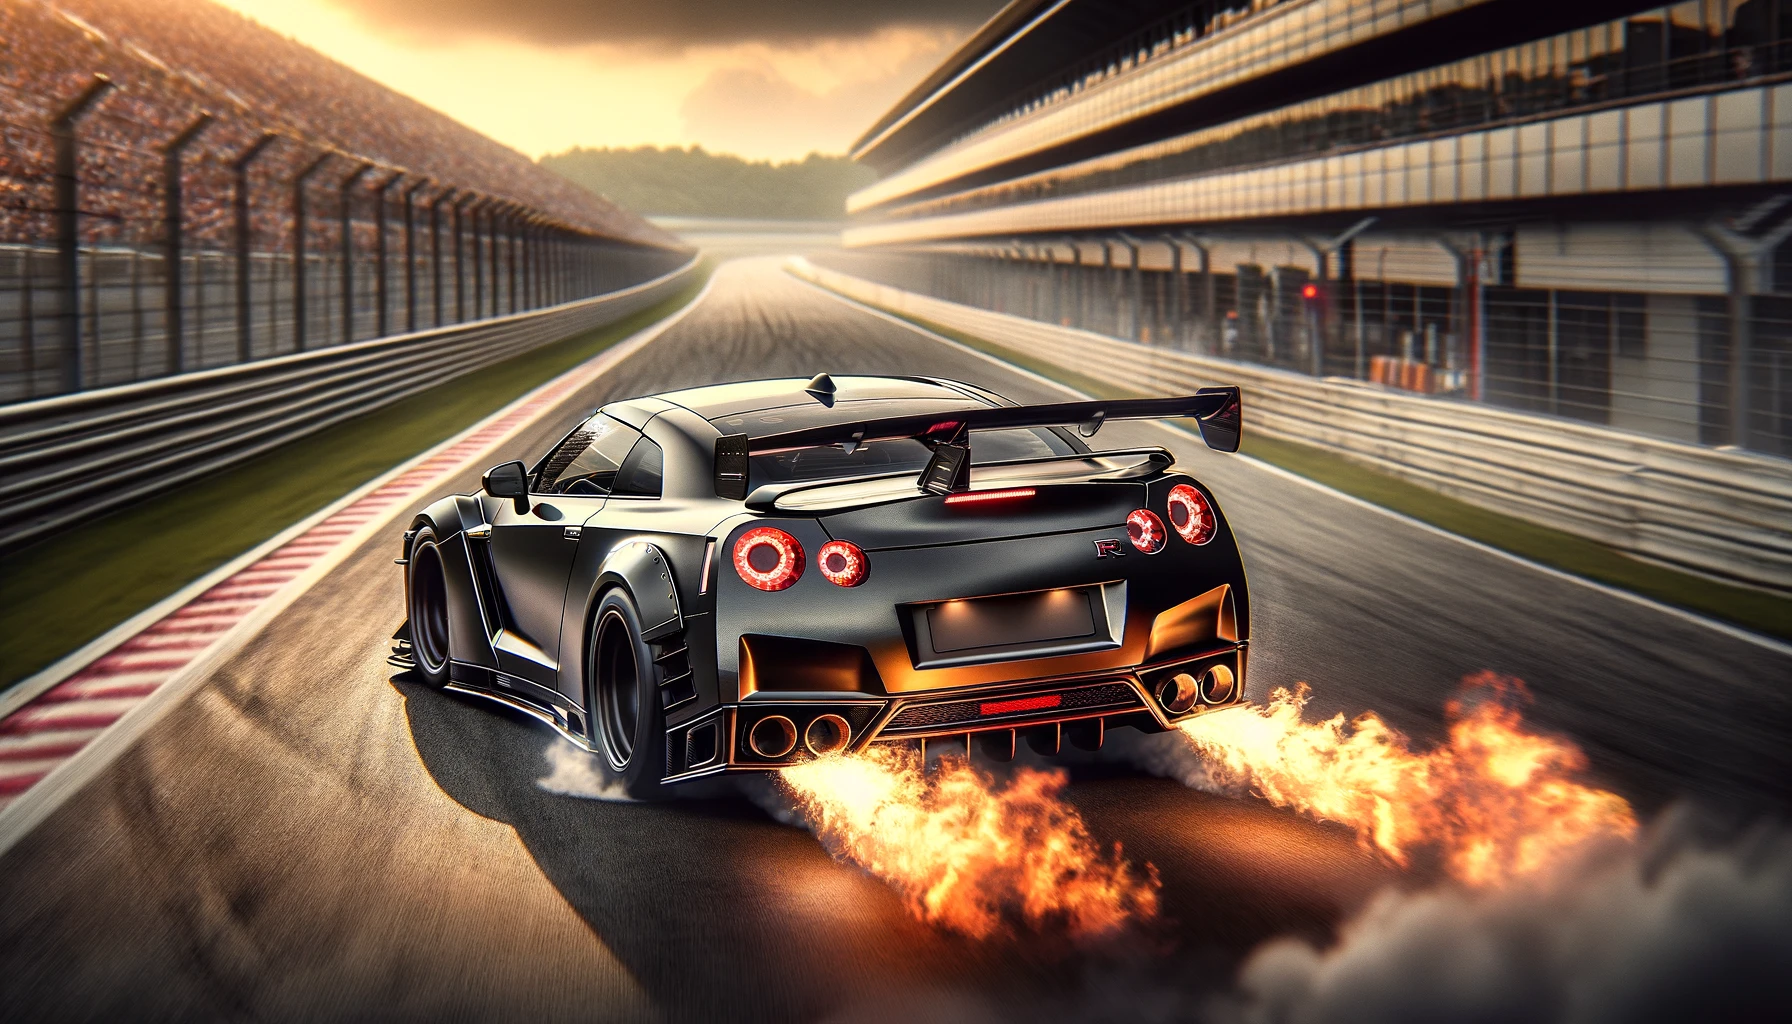 An example of a car with forced induction; A Nissan GT-R, driving fast down a racetrack with flames coming out the exhaust pipes, in a wide format.